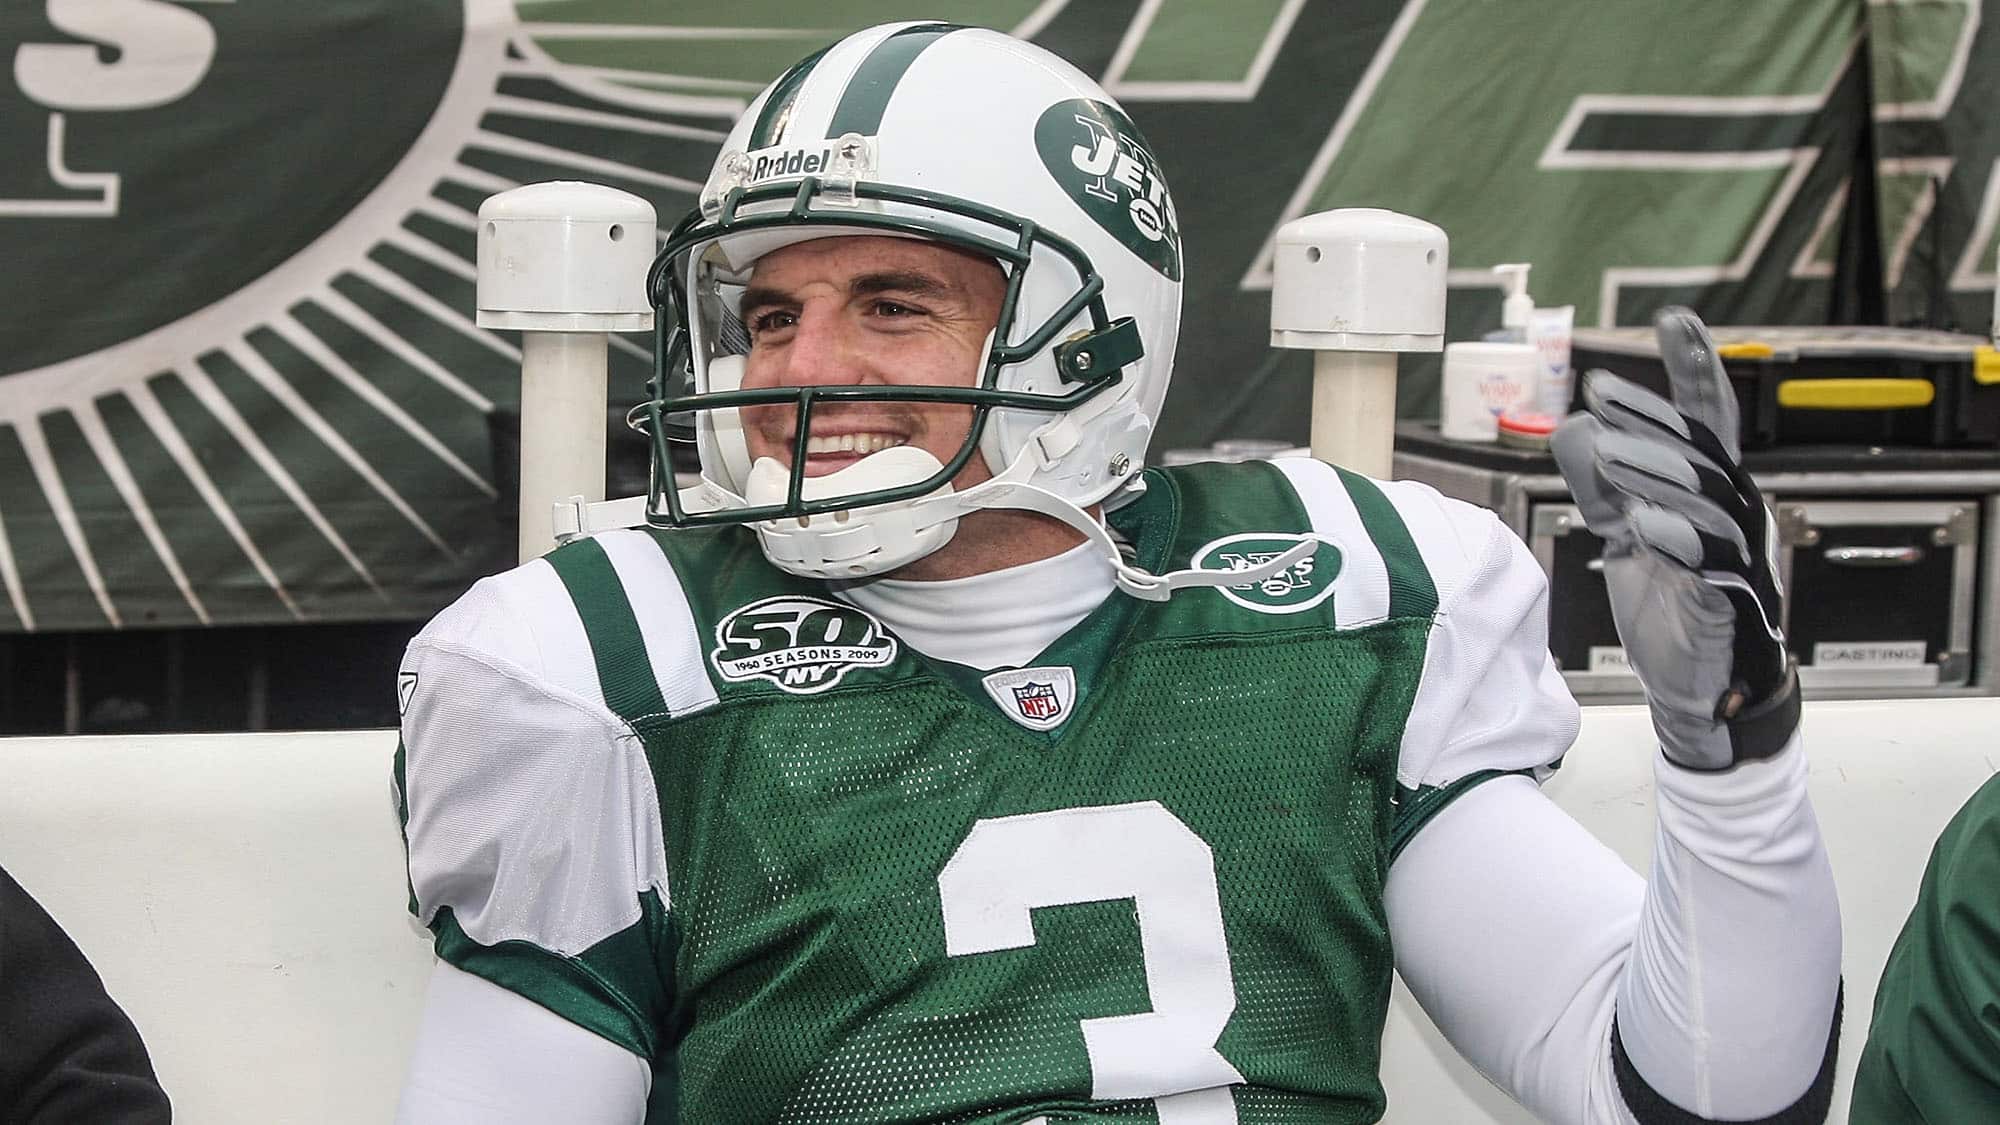 Two familiar New York voices will call CBS' Jets-Broncos broadcast